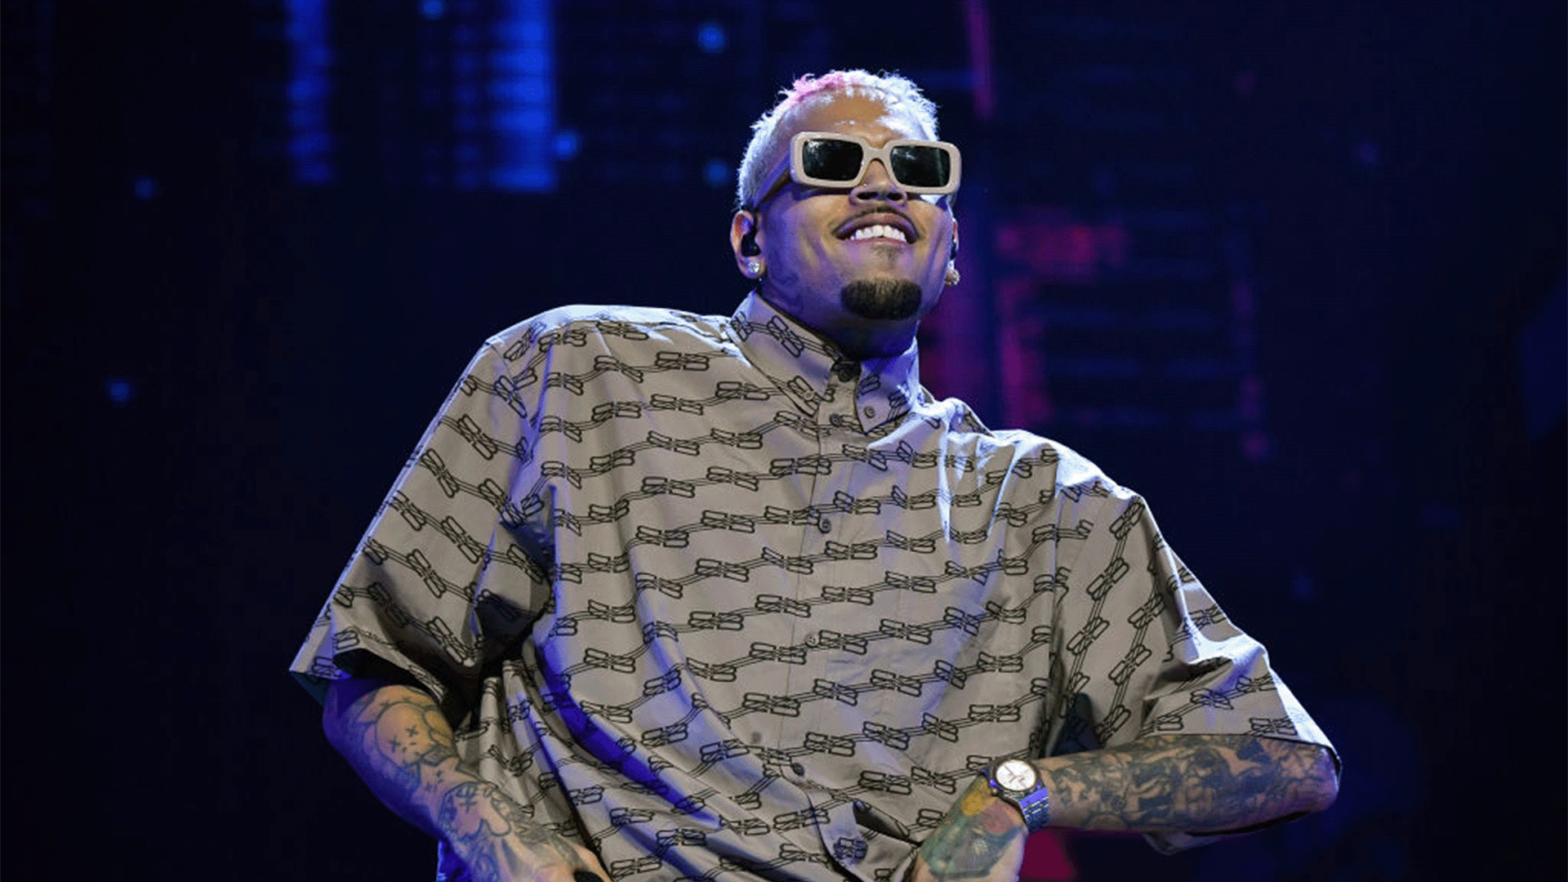 Did You Know That Chris Brown Owns 14 Burger King Franchises?